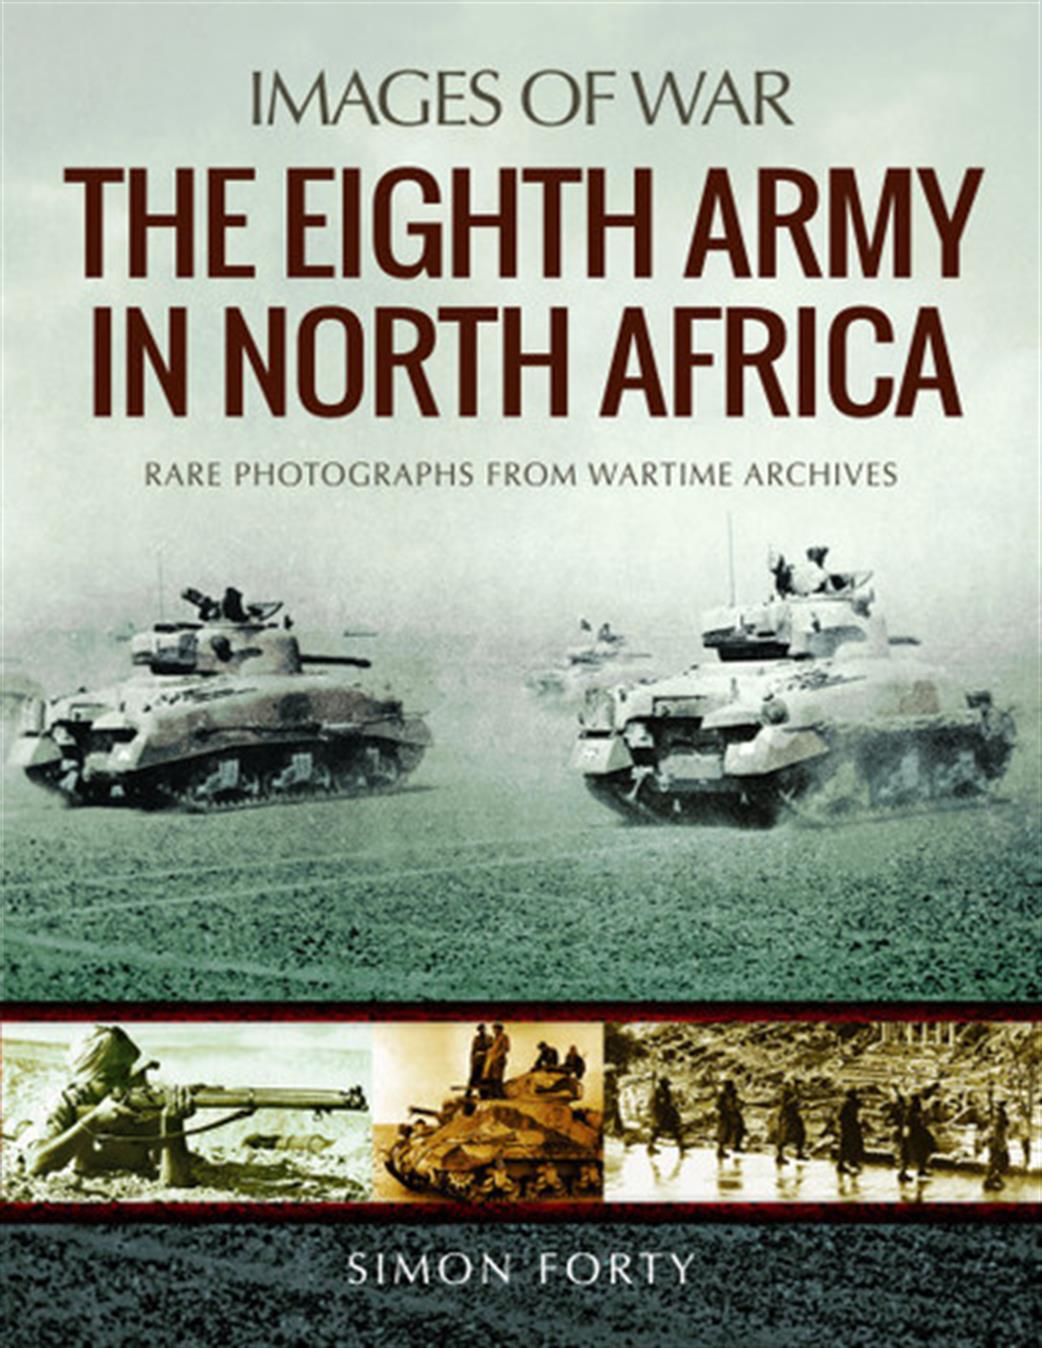 Irwell Press  9781526723796 Images Of War Eight Army in North Africa book by Simon Forty